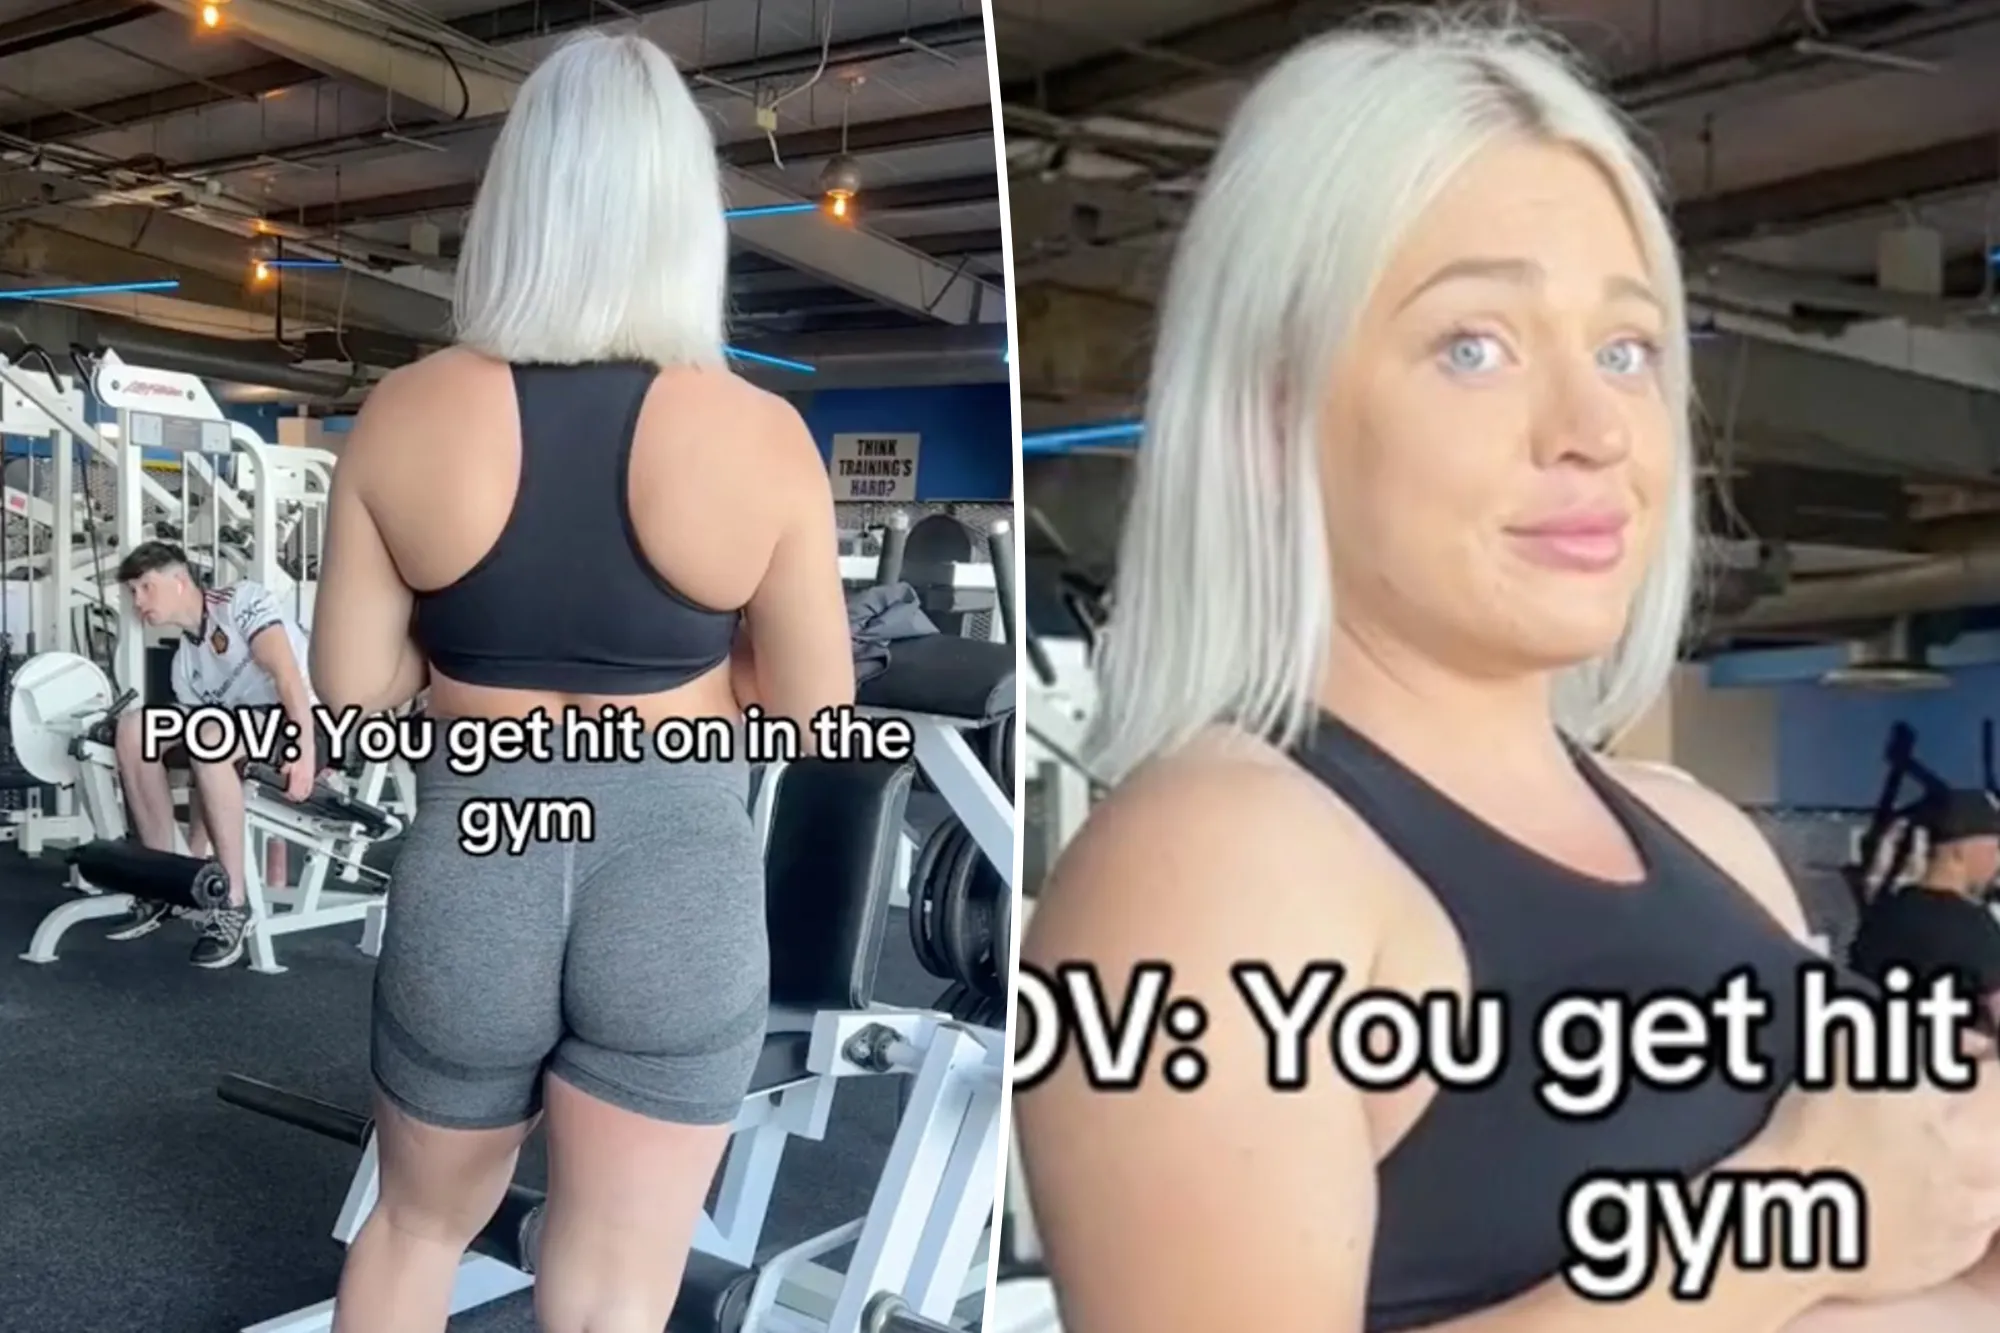 Men keep hitting on me at the gym, then I turn around and they get a huge surprise